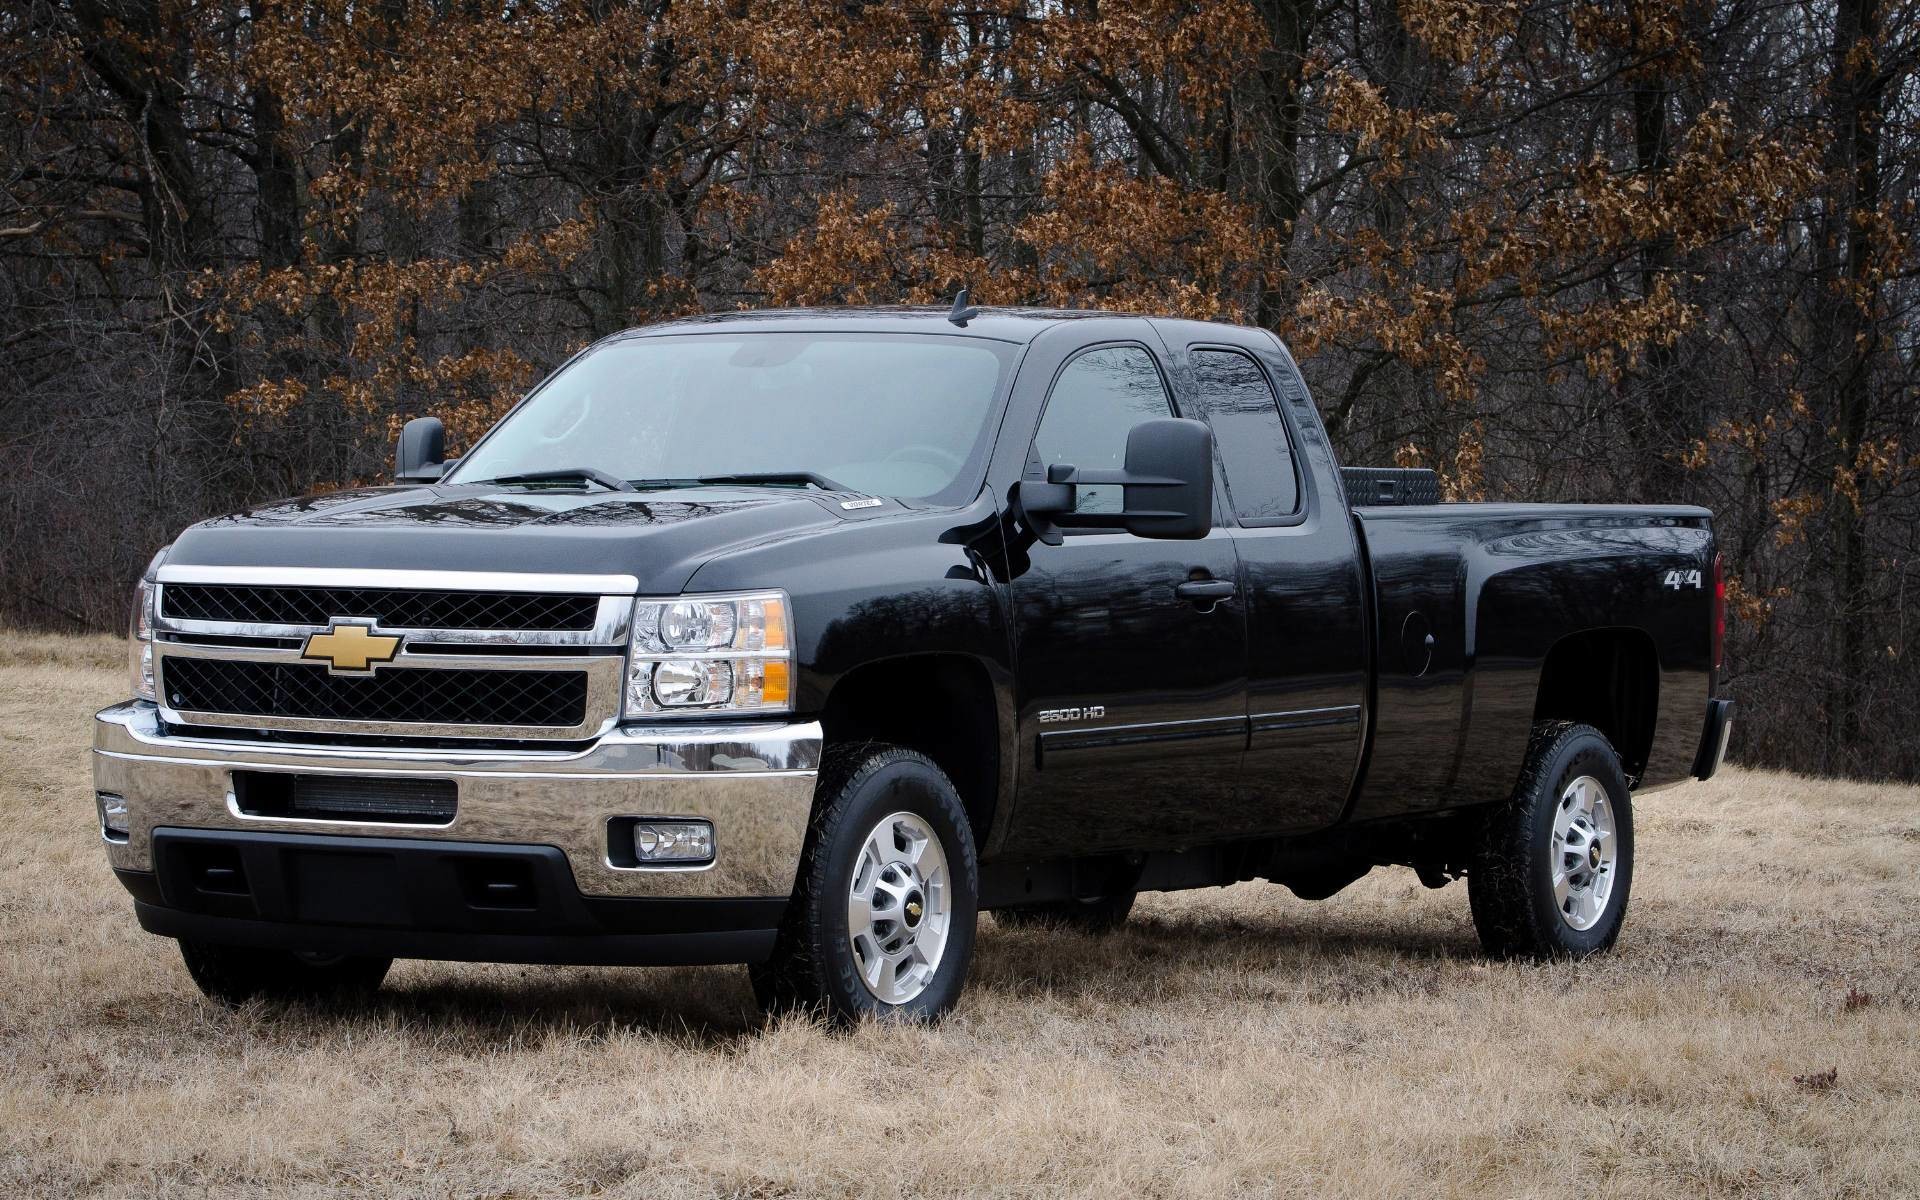 2013 Chevrolet Silverado Wallpapers | High Quality Wallpapers